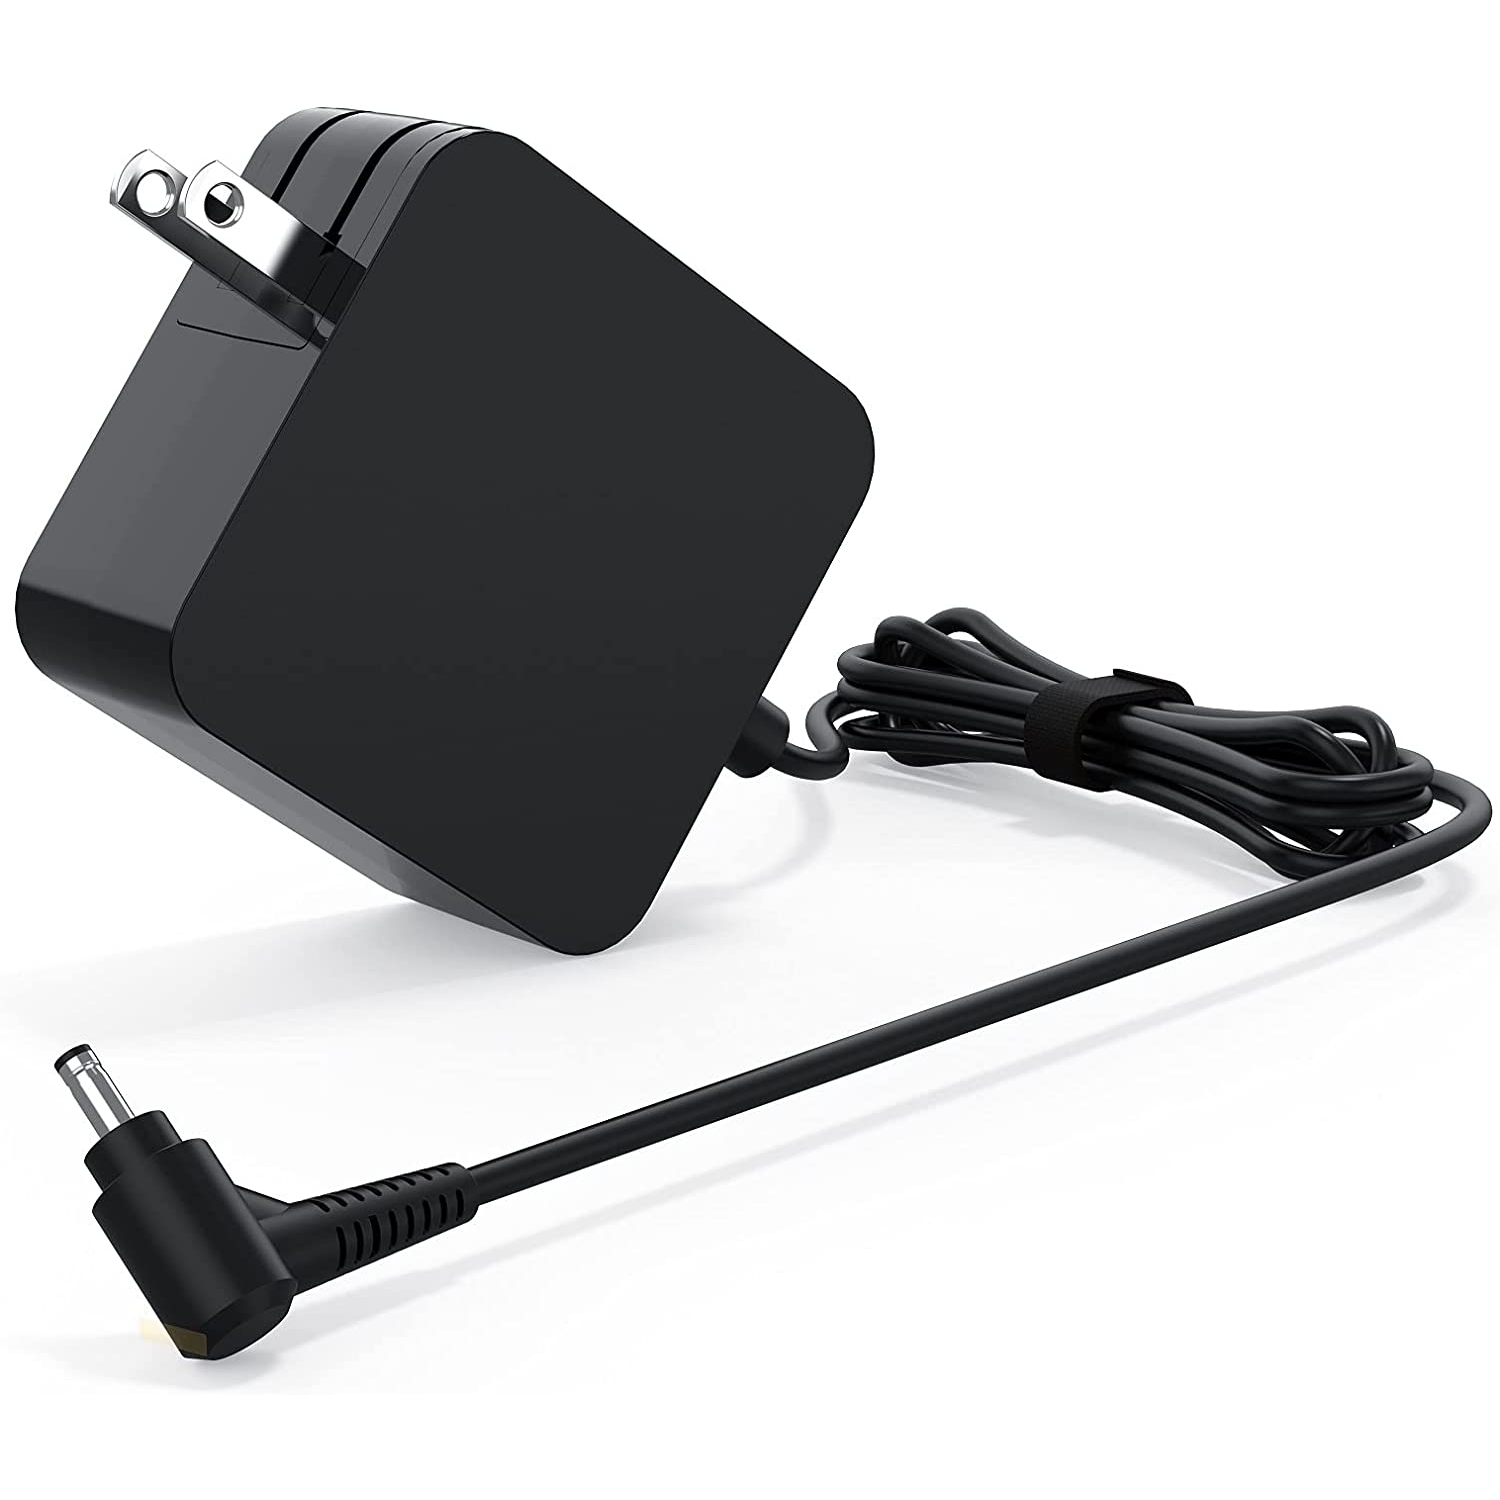 Ideapad Charger, ADL45WCC Charger for Lenovo Laptop Charger fits Ideapad 3 5 330S 320S 510 520 710S, Yoga 710, ADLX65CCGU2A 65W AC Power Adapter for Lenovo Charger (Foldable Plug)